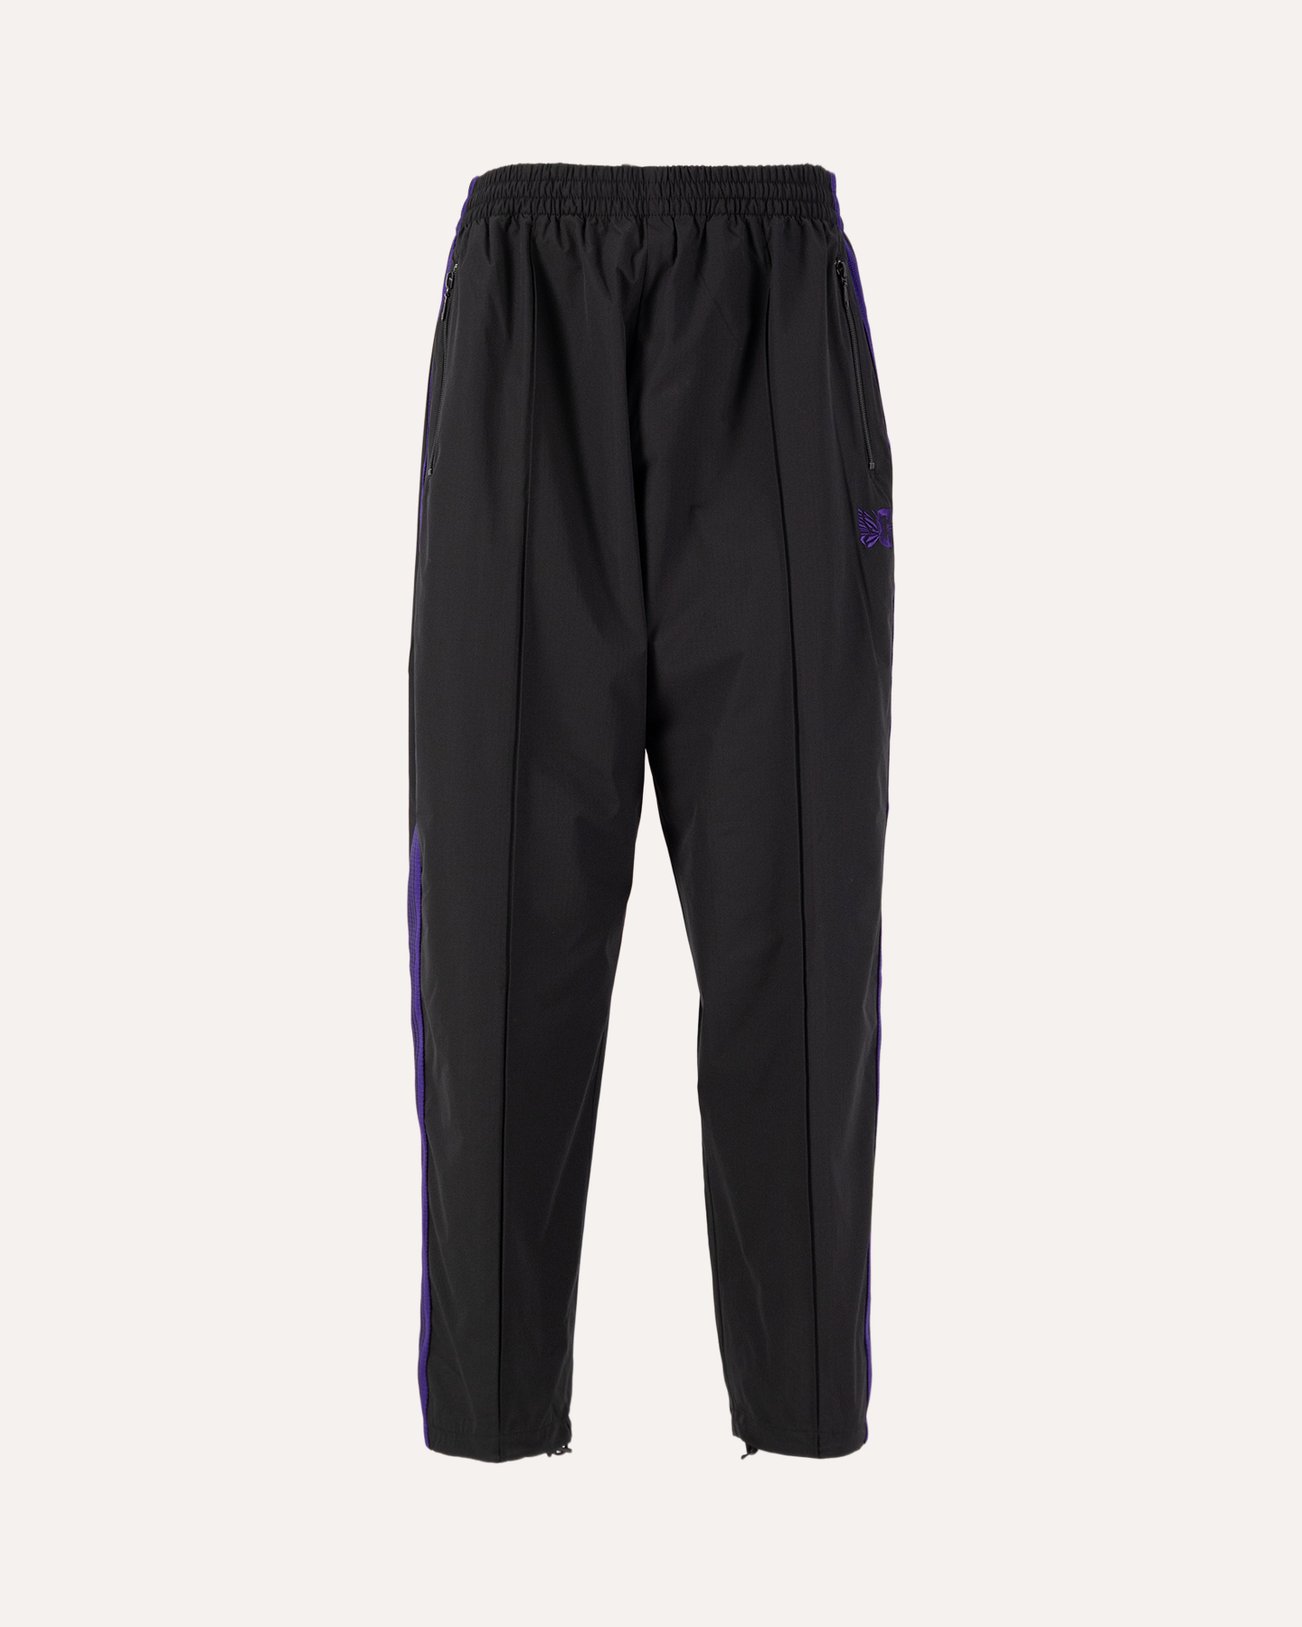 Needles Needles x DC Shoes Track Pant - Poly Ripstop BLACK 1